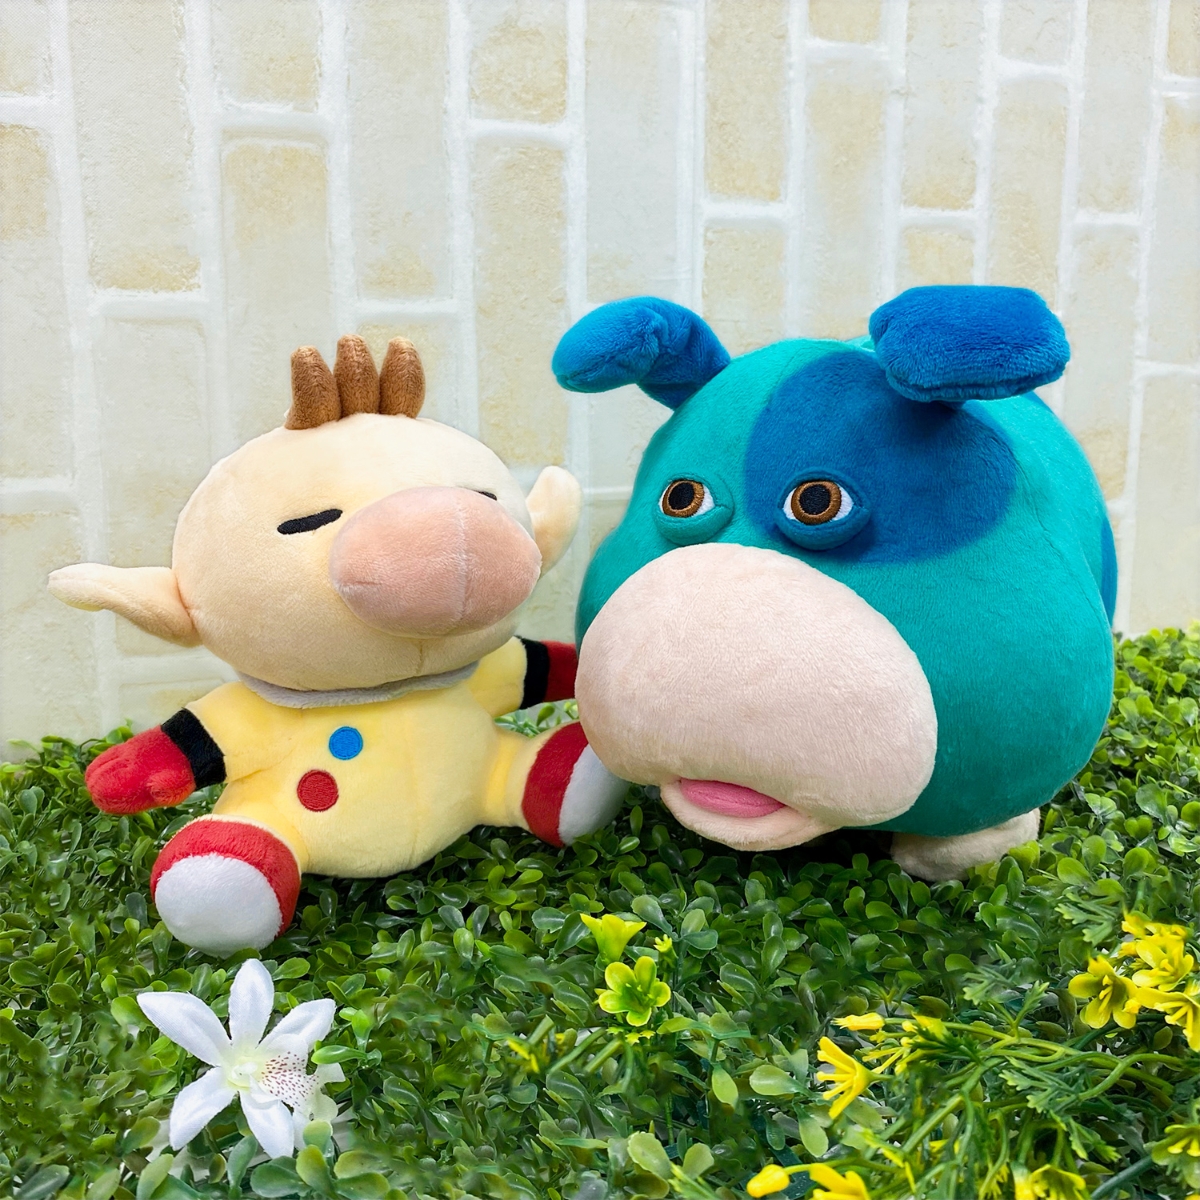 pikmin-all-star-collection-pikmim4-moss-nuigurumi-announce61